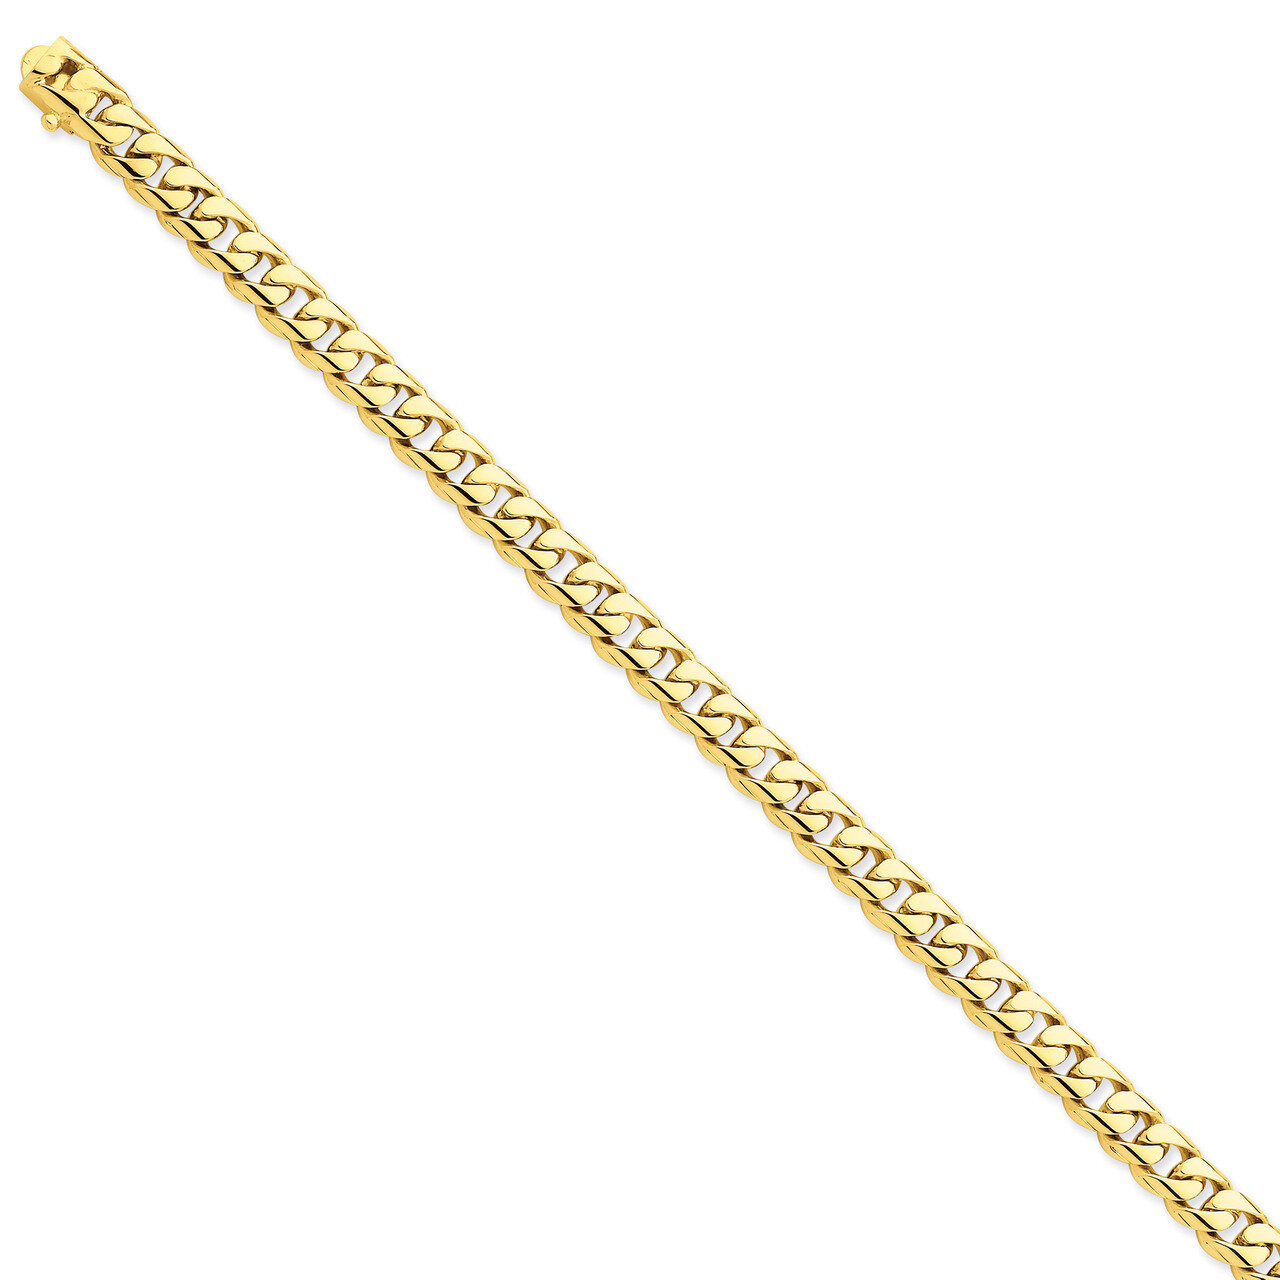 7.25mm Hand-polished Rounded Curb Chain 22 Inch 14k Gold LK124-22